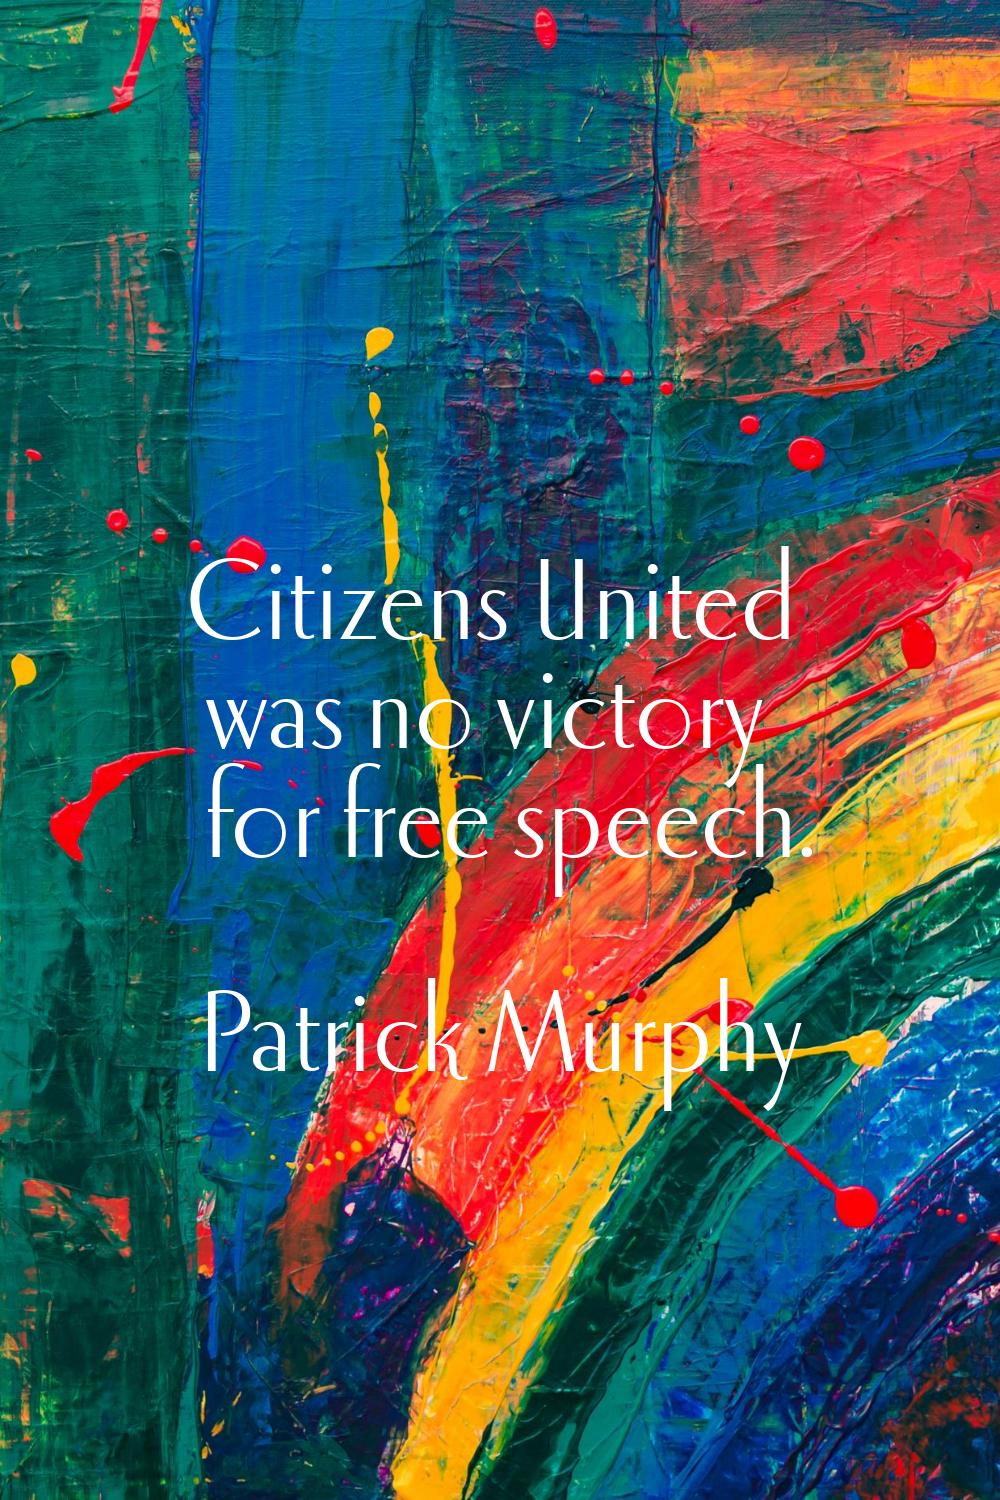 Citizens United was no victory for free speech.